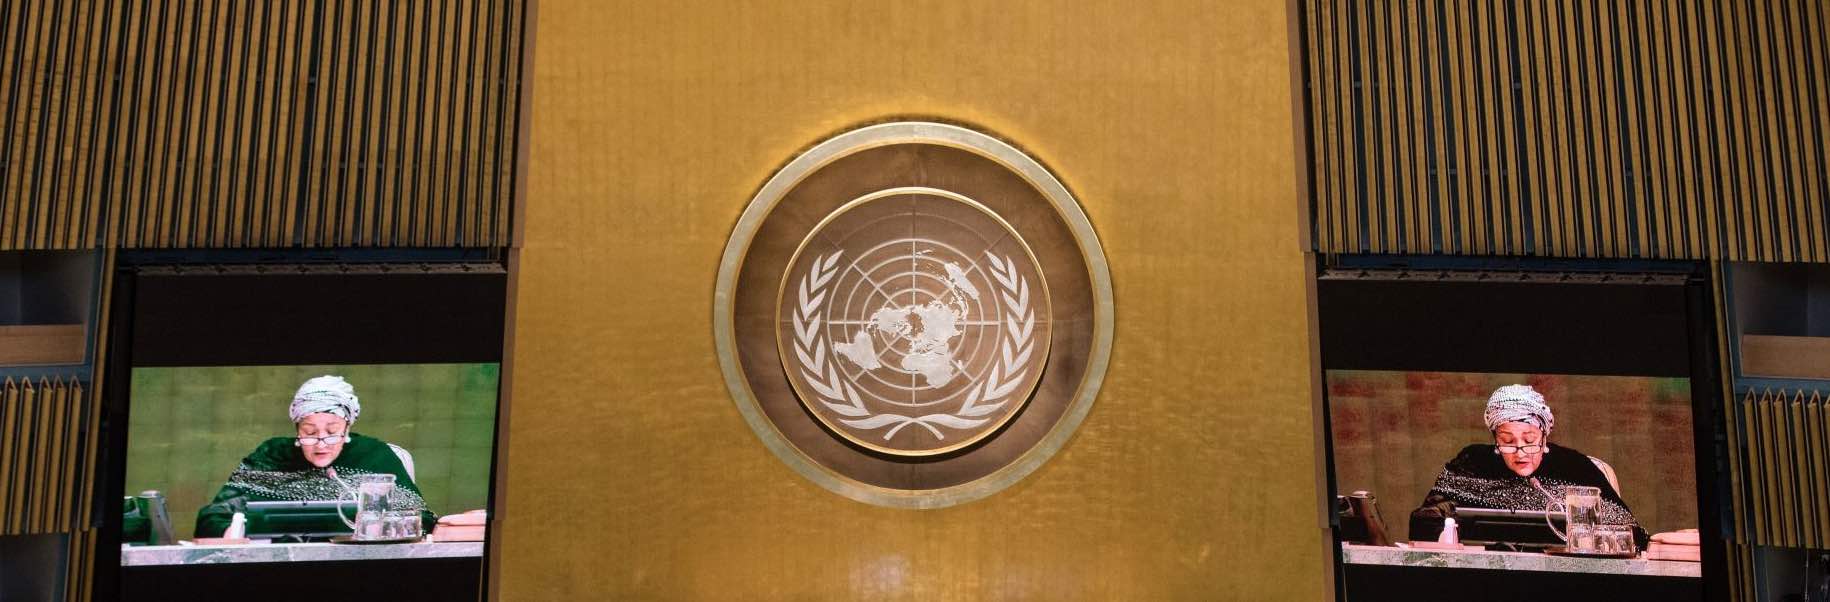 United Nations Chamber in session